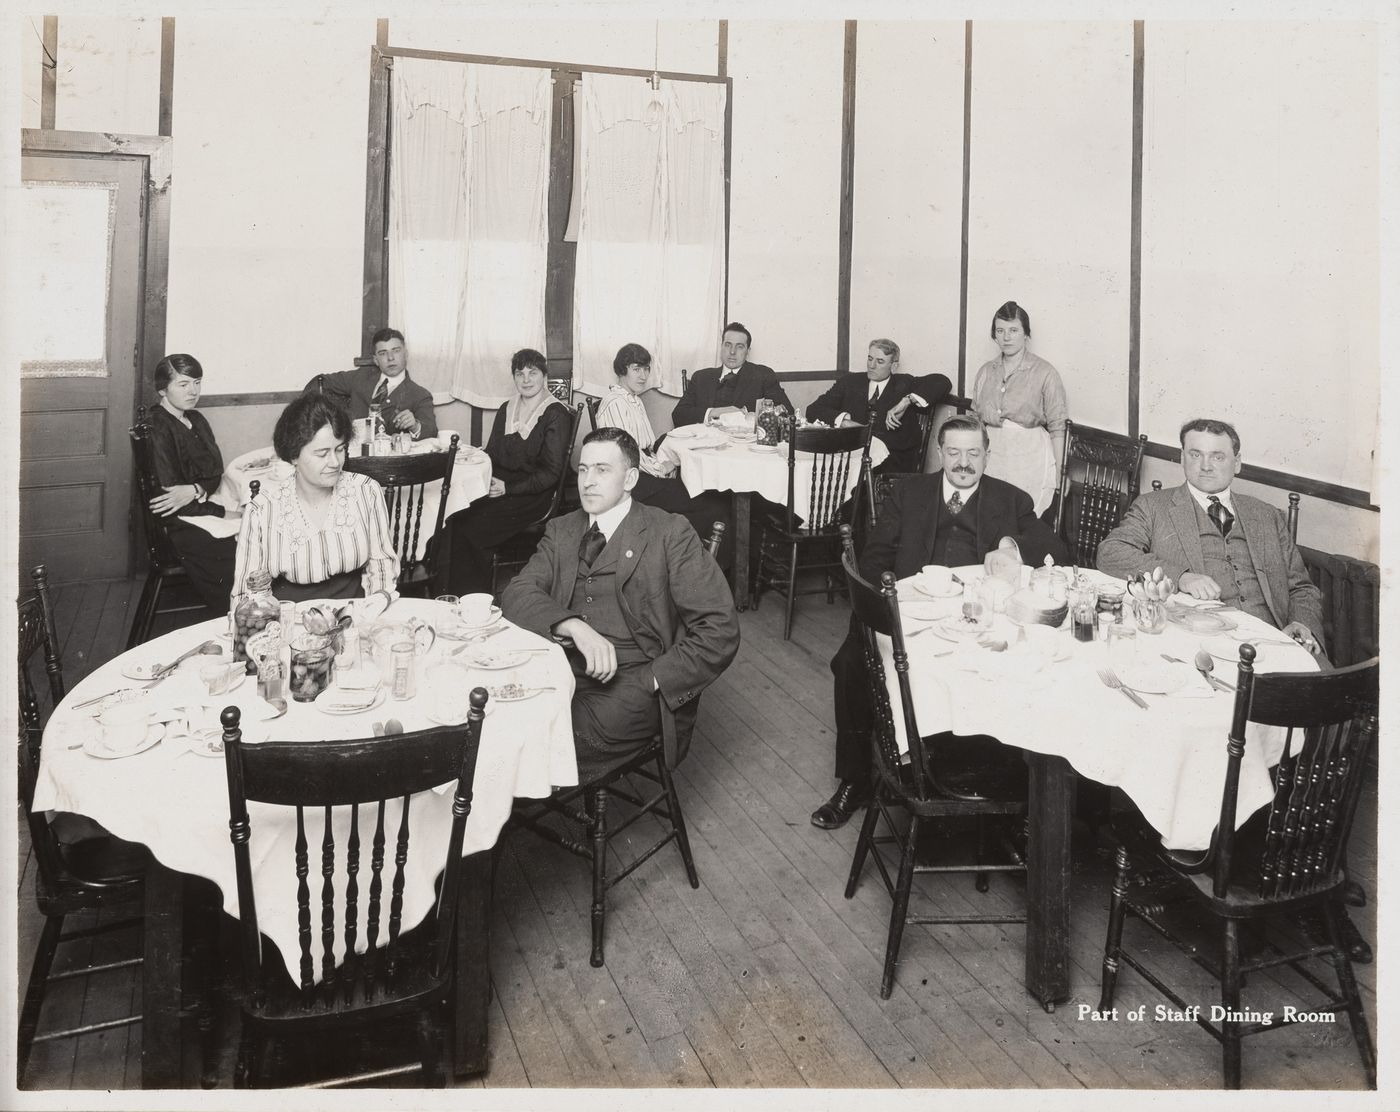 Interior view of staff dining room at the Energite Explosives Plant No. 3, the Shell Loading Plant, Renfrew, Ontario, Canada